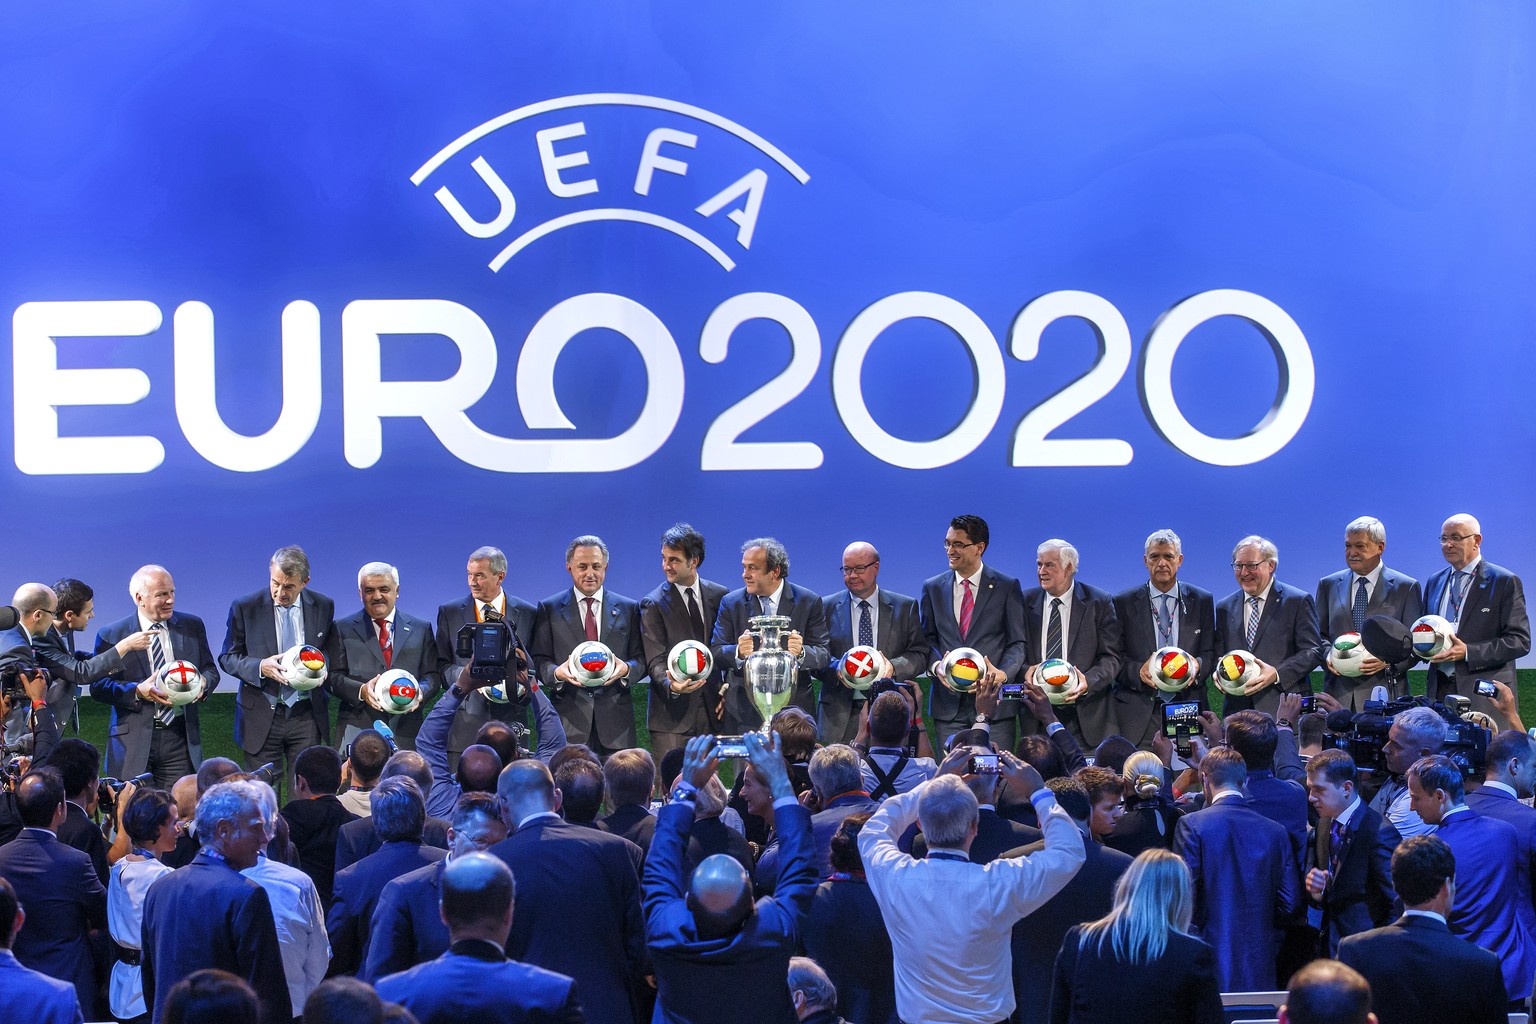 epa08300495 (FILE) - Representatives of the 13 hosts cities of the UEFA EURO 2020 pose with UEFA president Michel Platini (C) for the photographers after the UEFA EURO 2020 hosts announcement ceremony ...